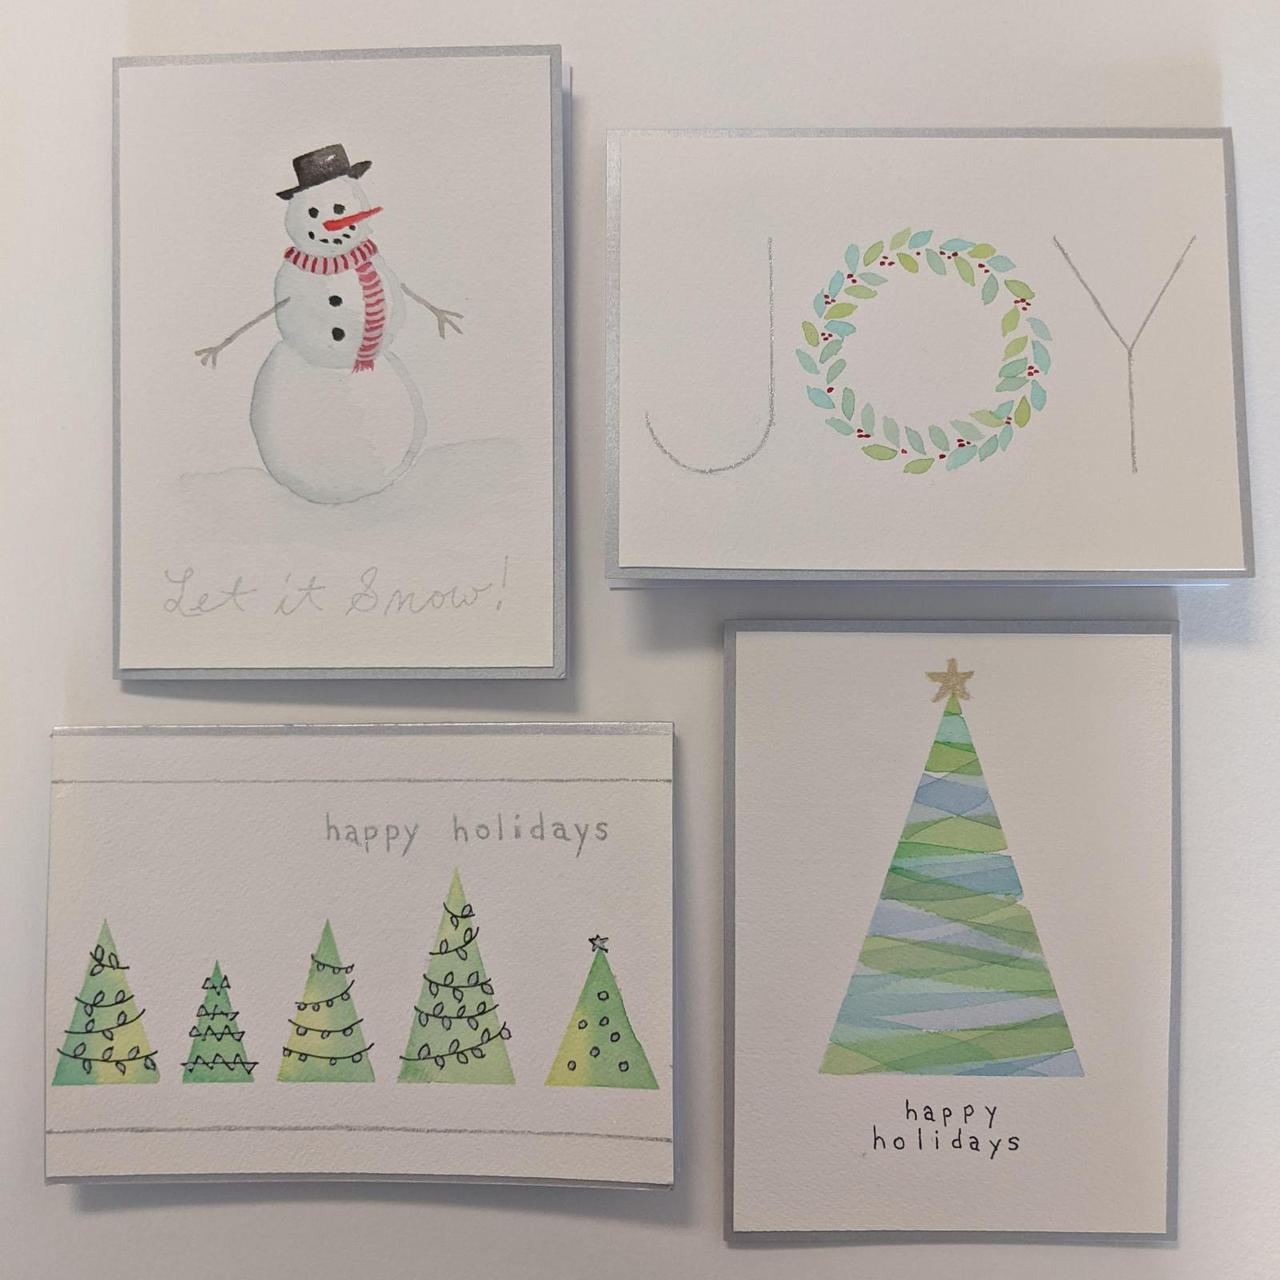 all four holiday cards in a grid, going counter clockwise from the upper left, the cards picture a snowman, the word "JOY", a single christmas tree, and a row of christmas trees.